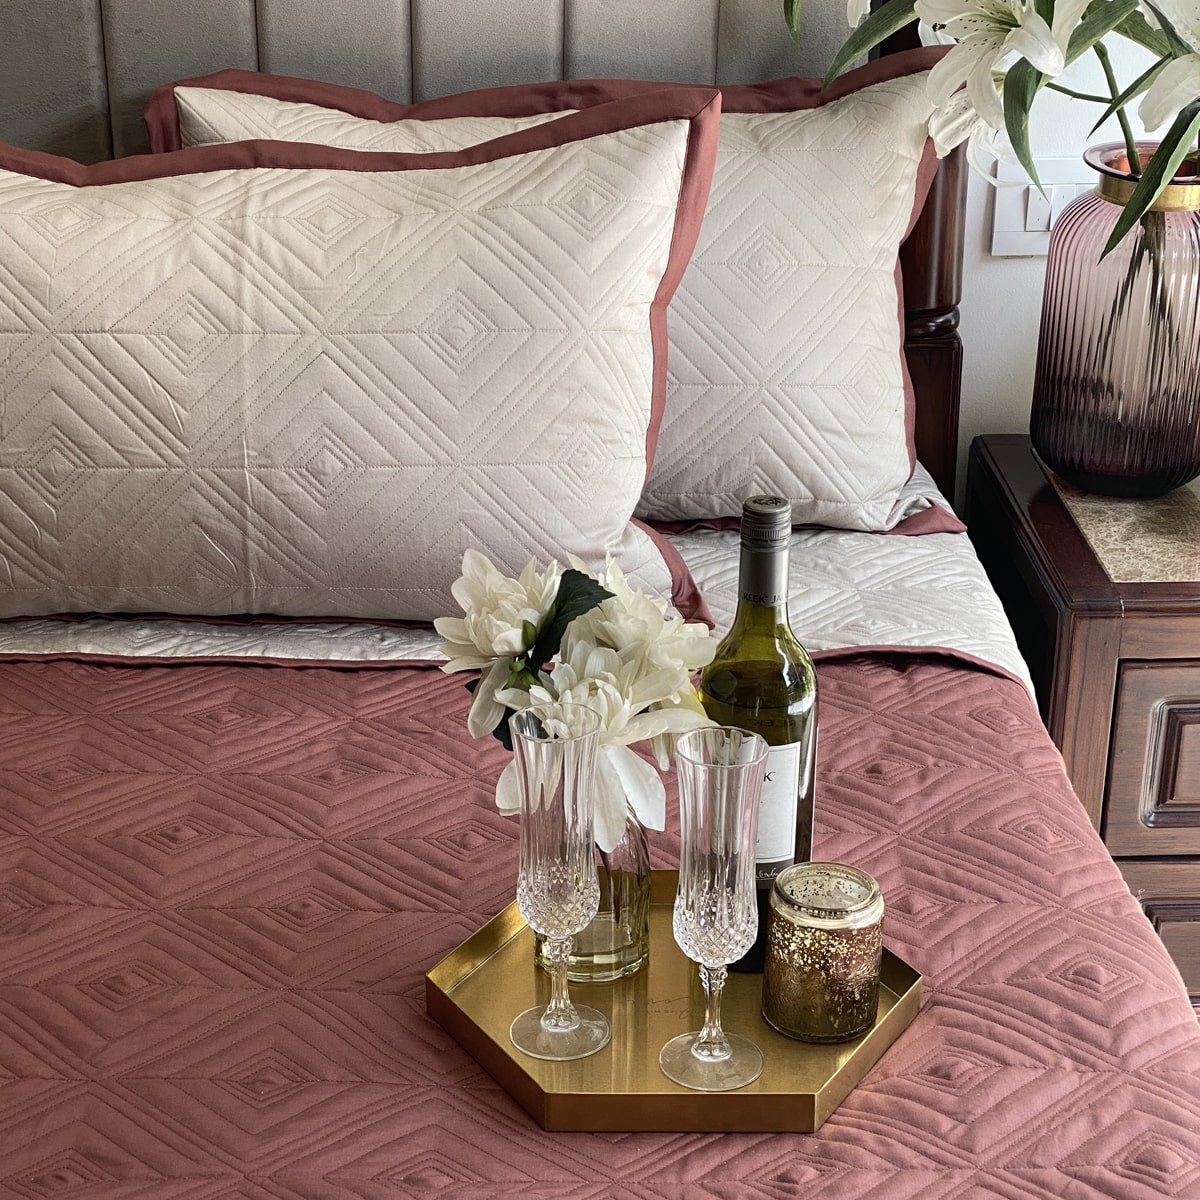 Quilted Blush and Beige Ripple Reversible Bedspread